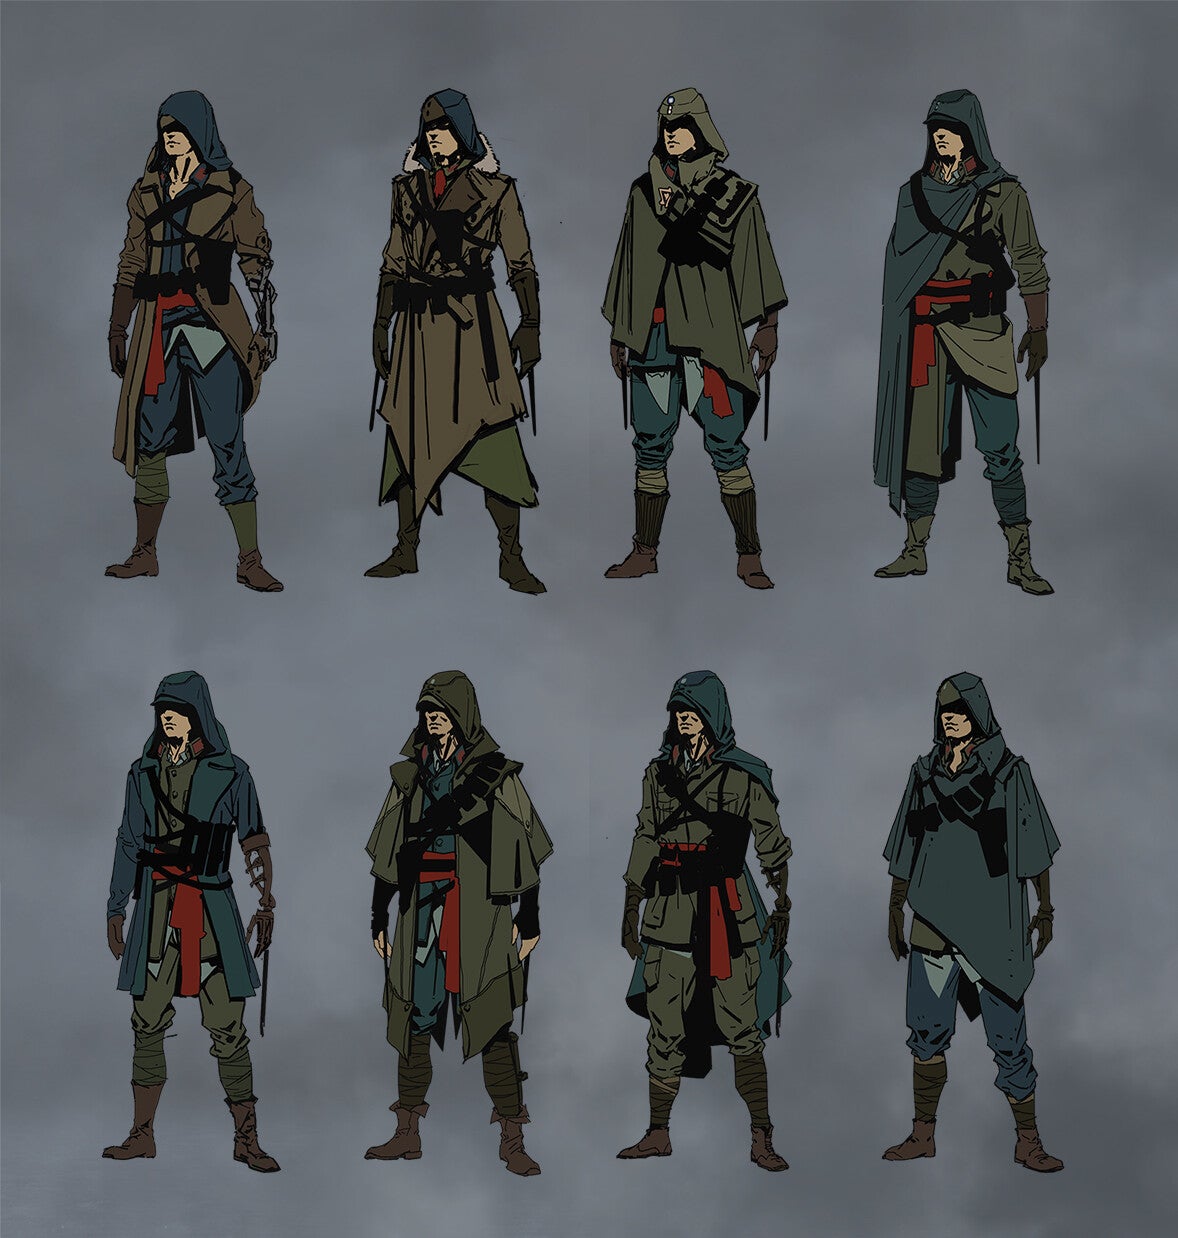 A Very Cool Idea For A New Assassin’s Creed Game